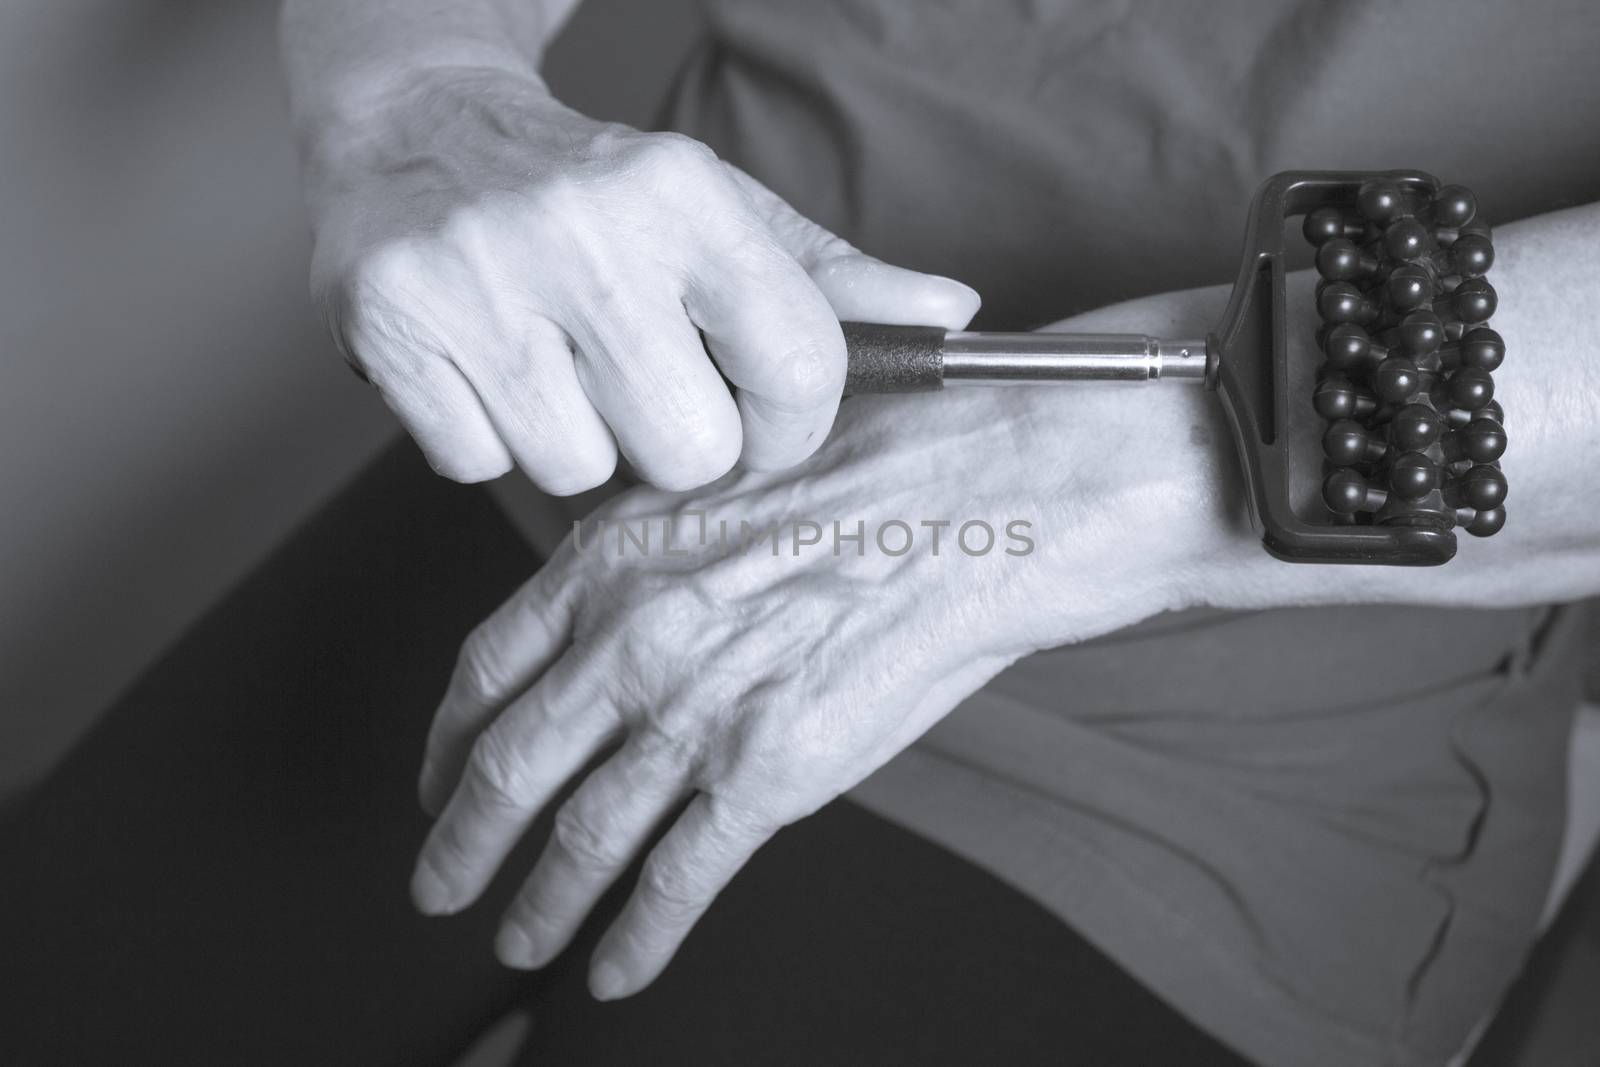 Older woman self massaging with small massager by GemaIbarra